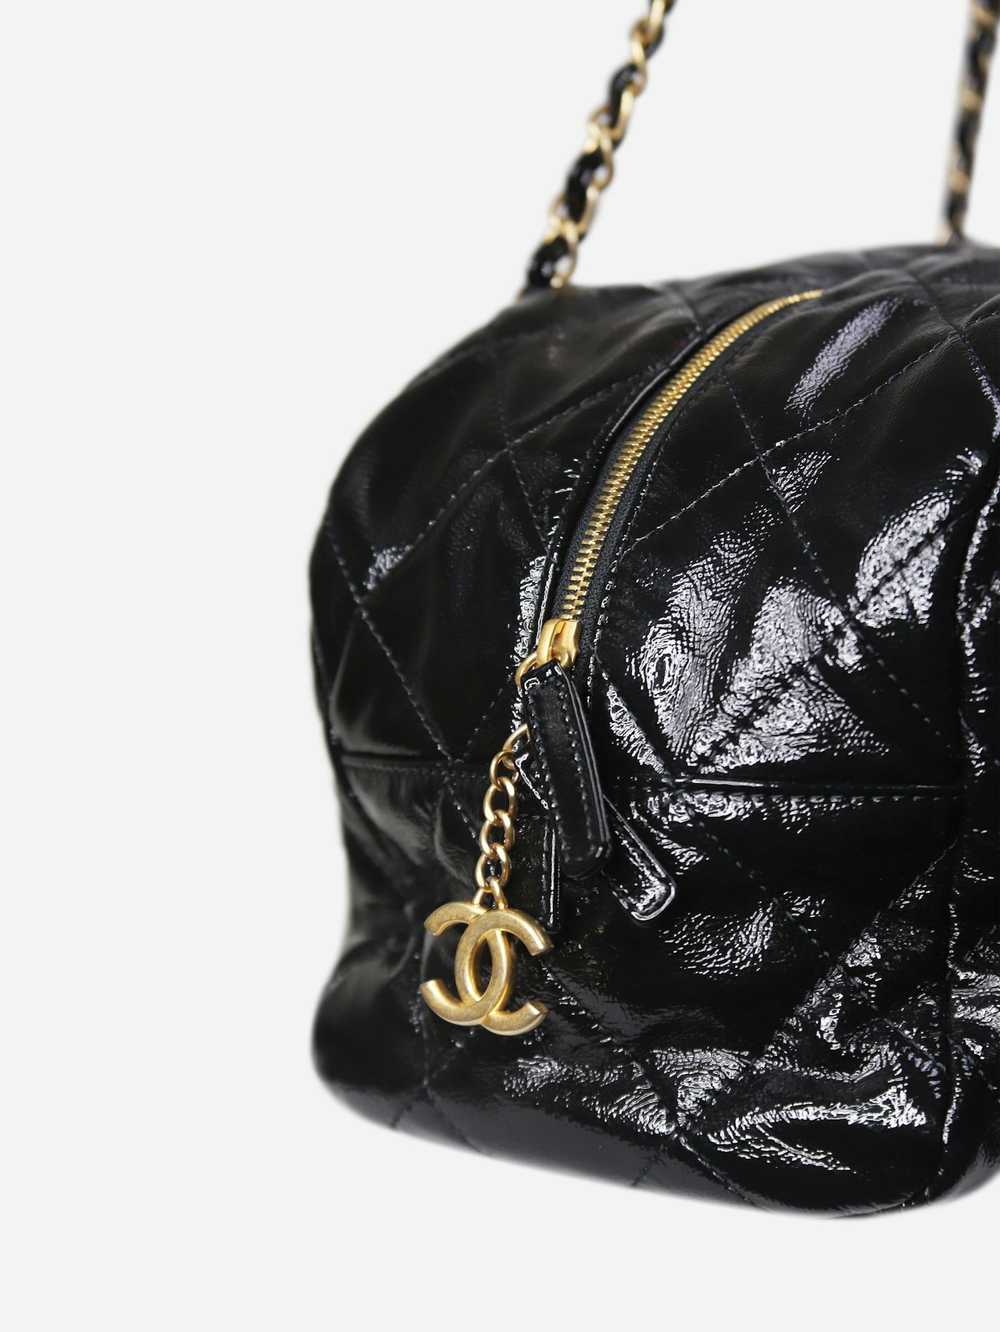 Chanel Black 2020 patent leather bowling bag - image 3